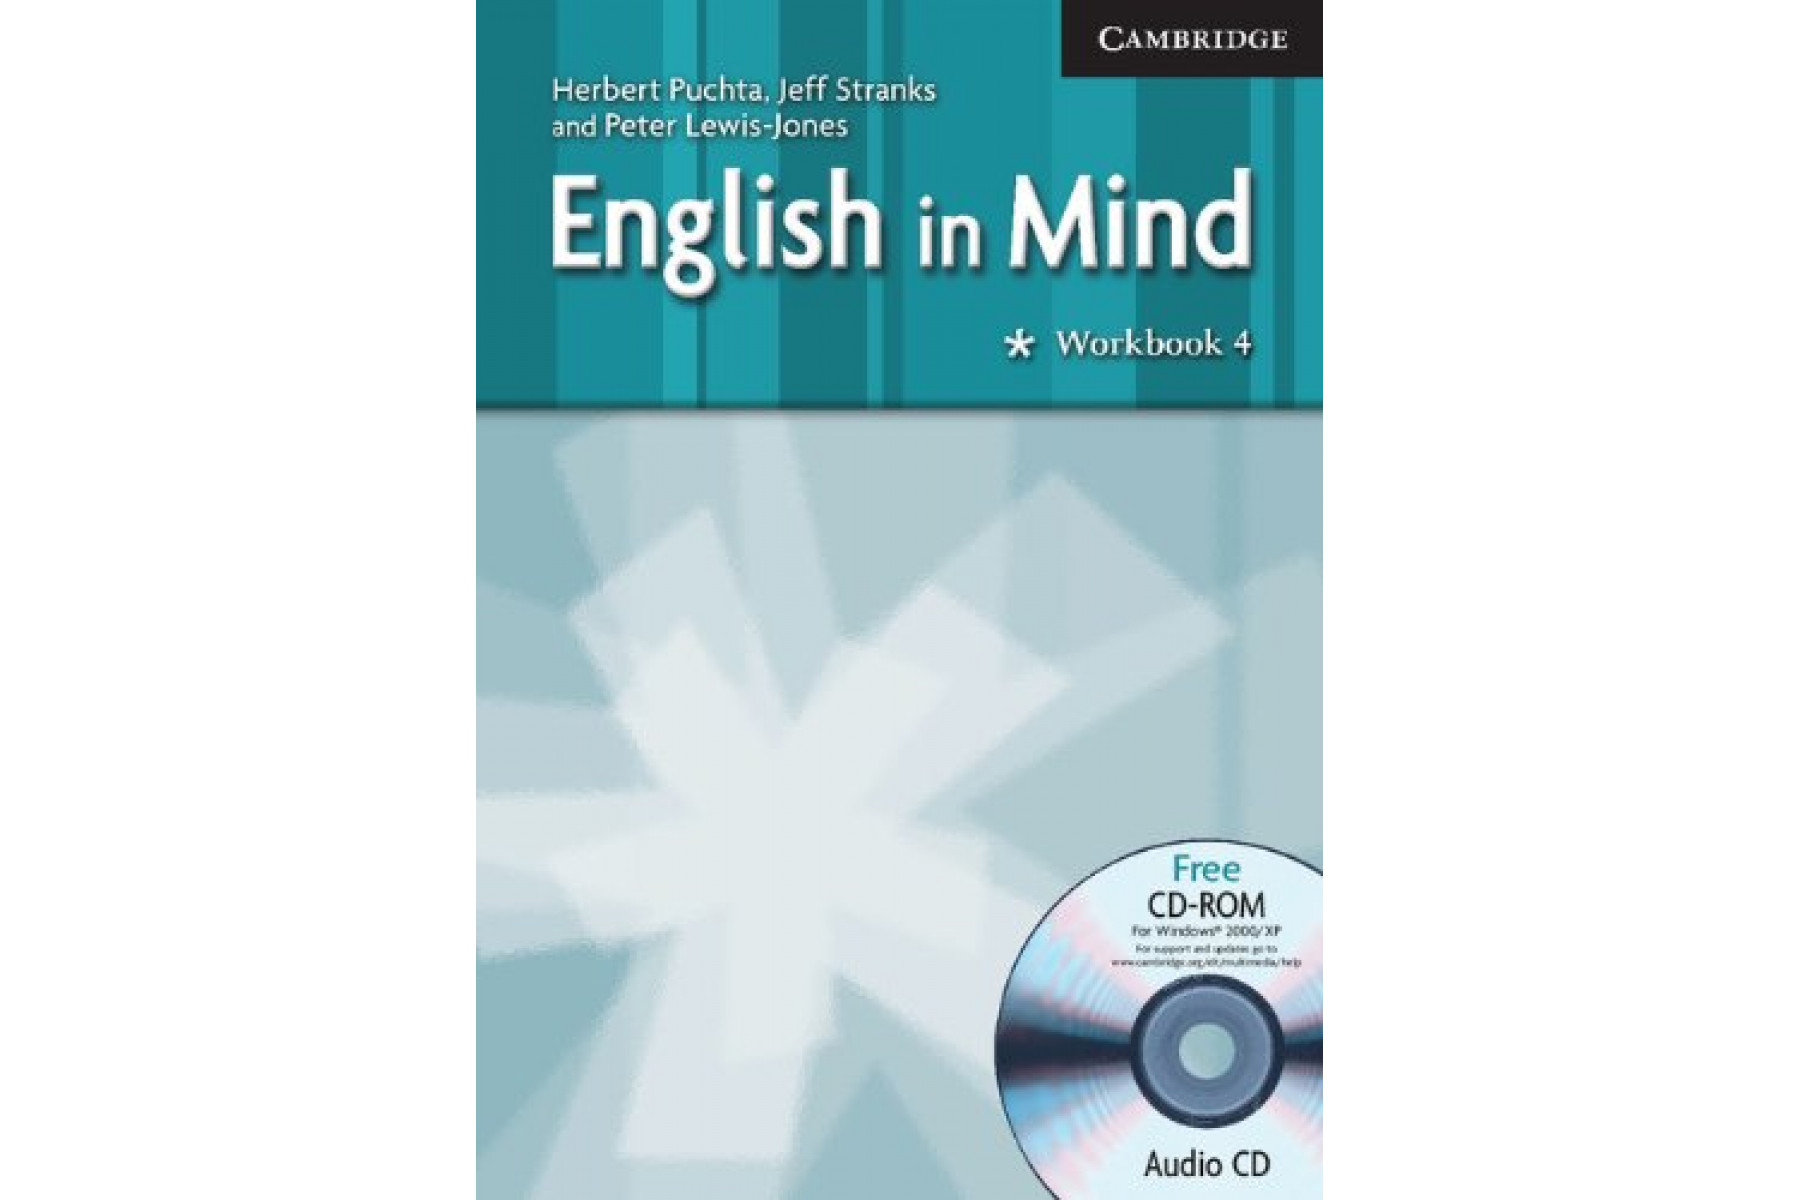 English in Mind 4 Workbook with Audio CD/CD-ROM